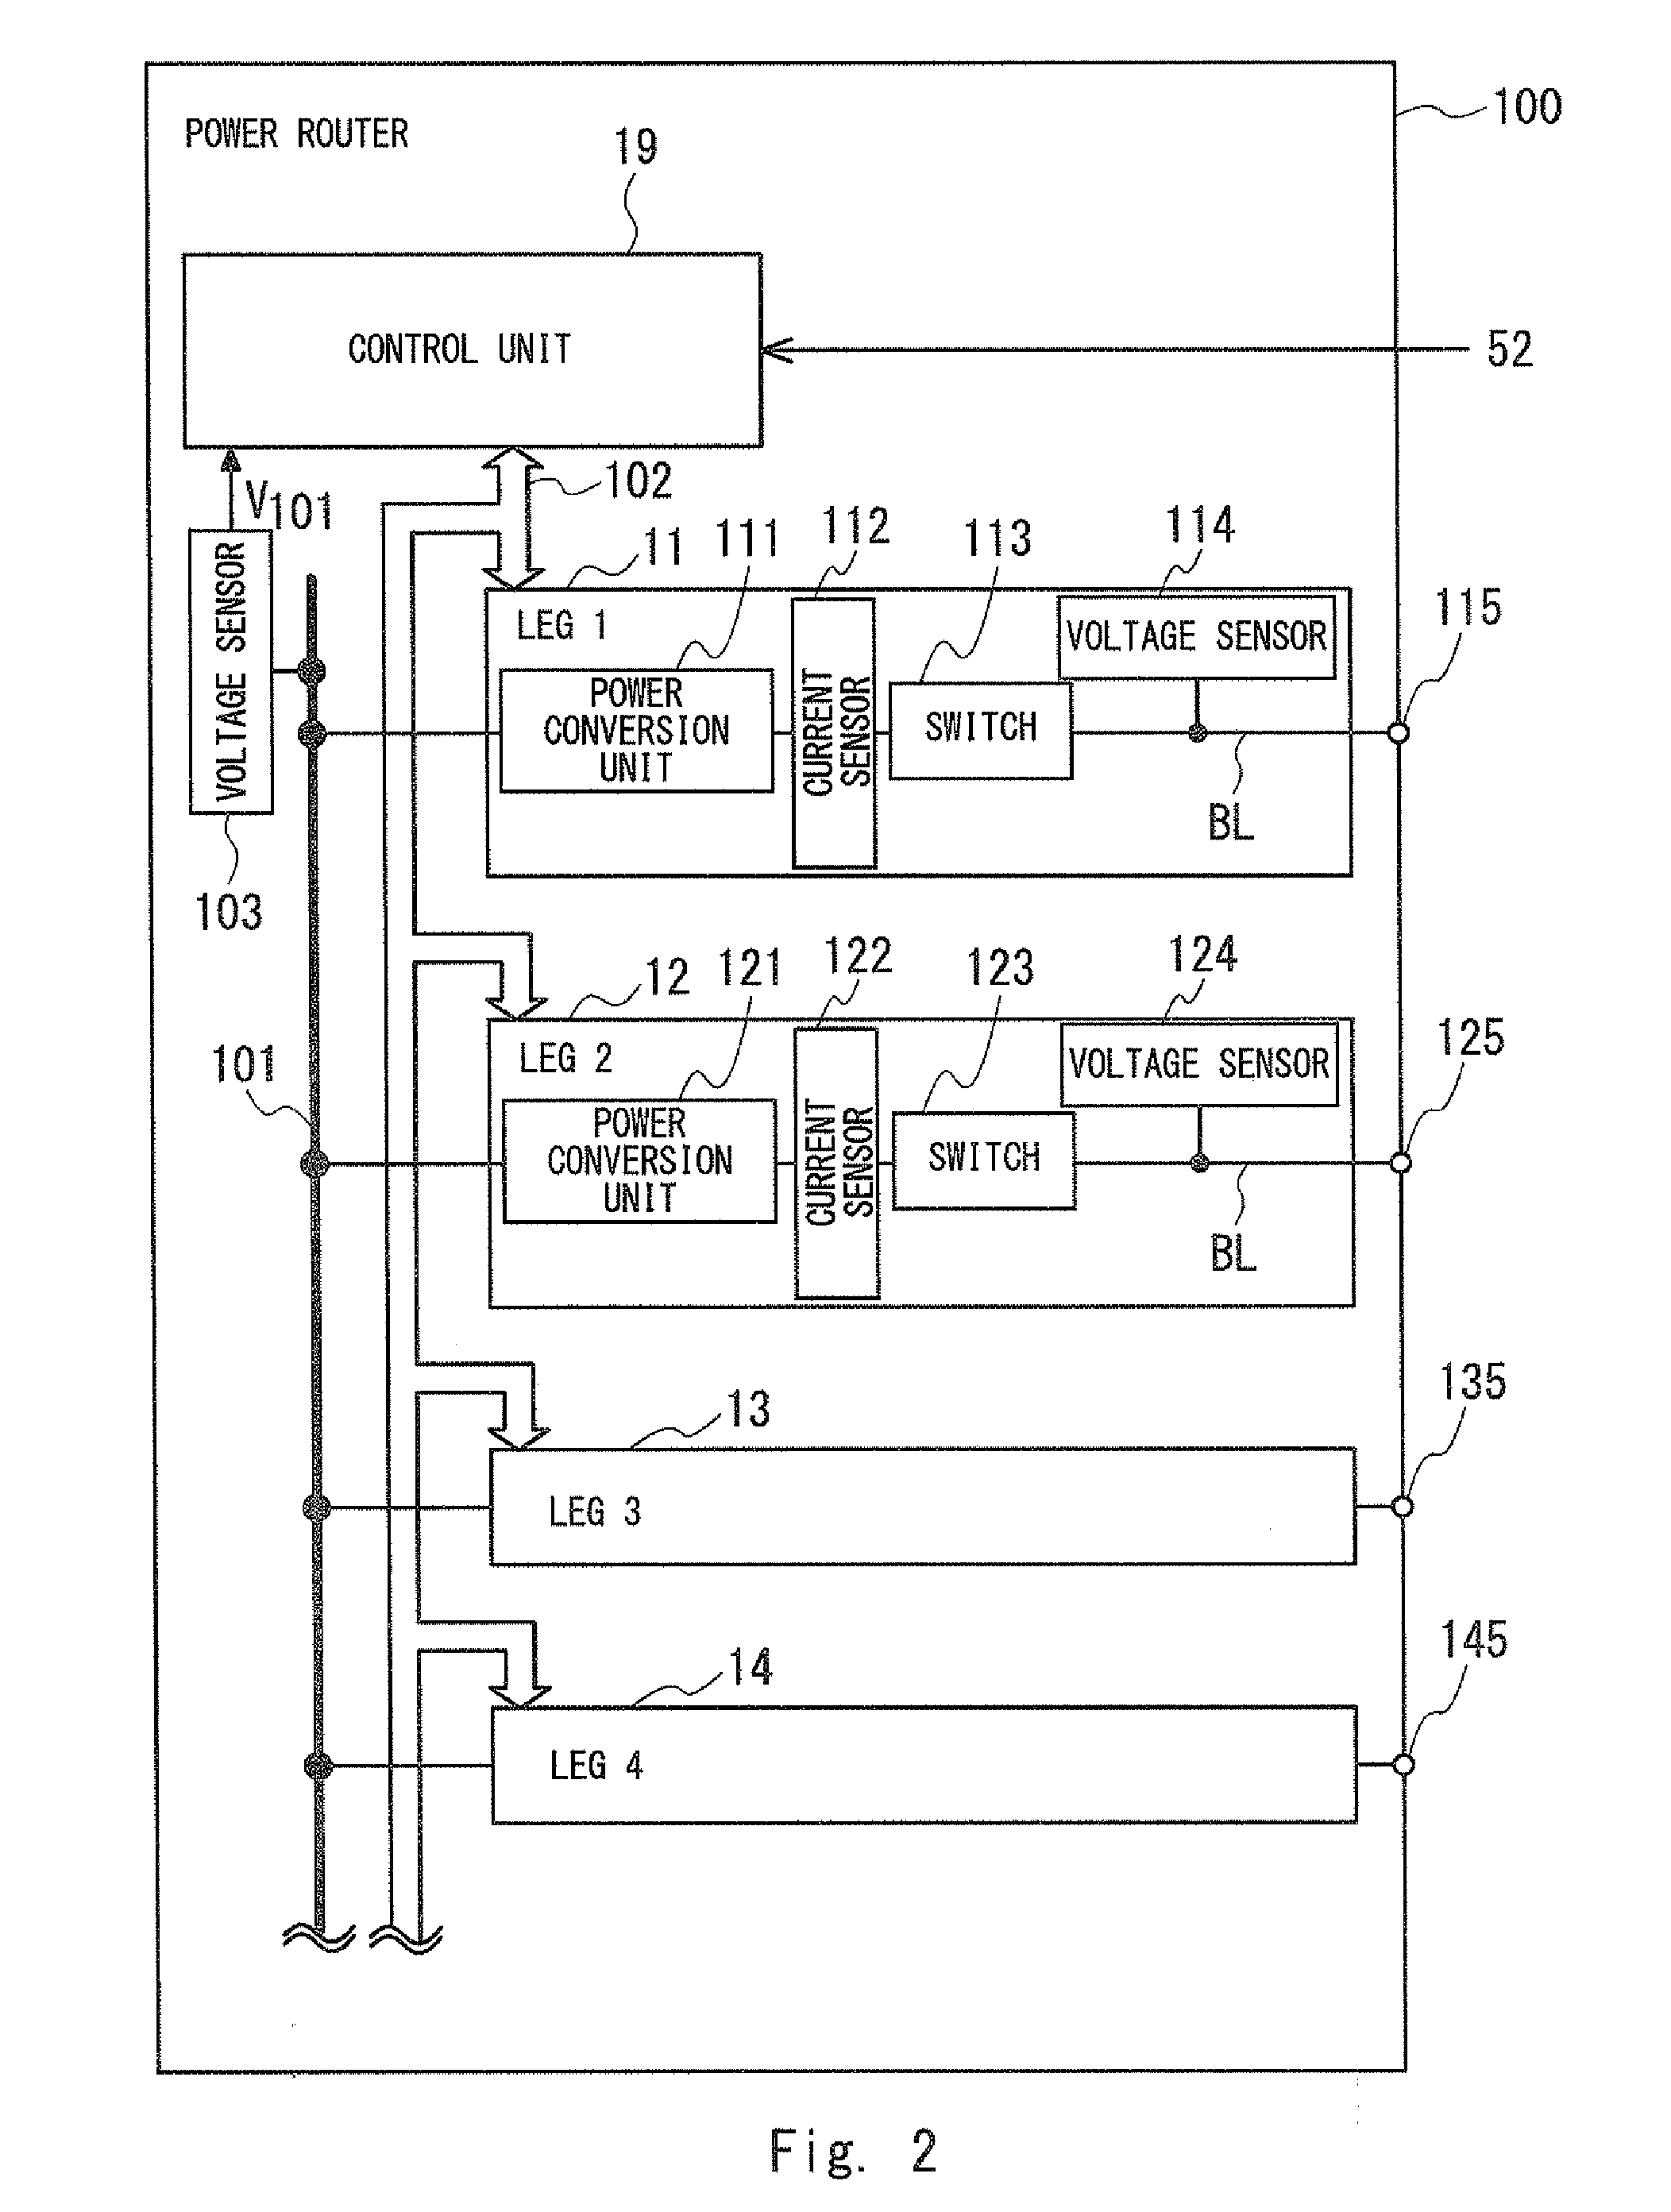 Power router and operation control method thereof, power network system, and non-transitory computer readable media storing program